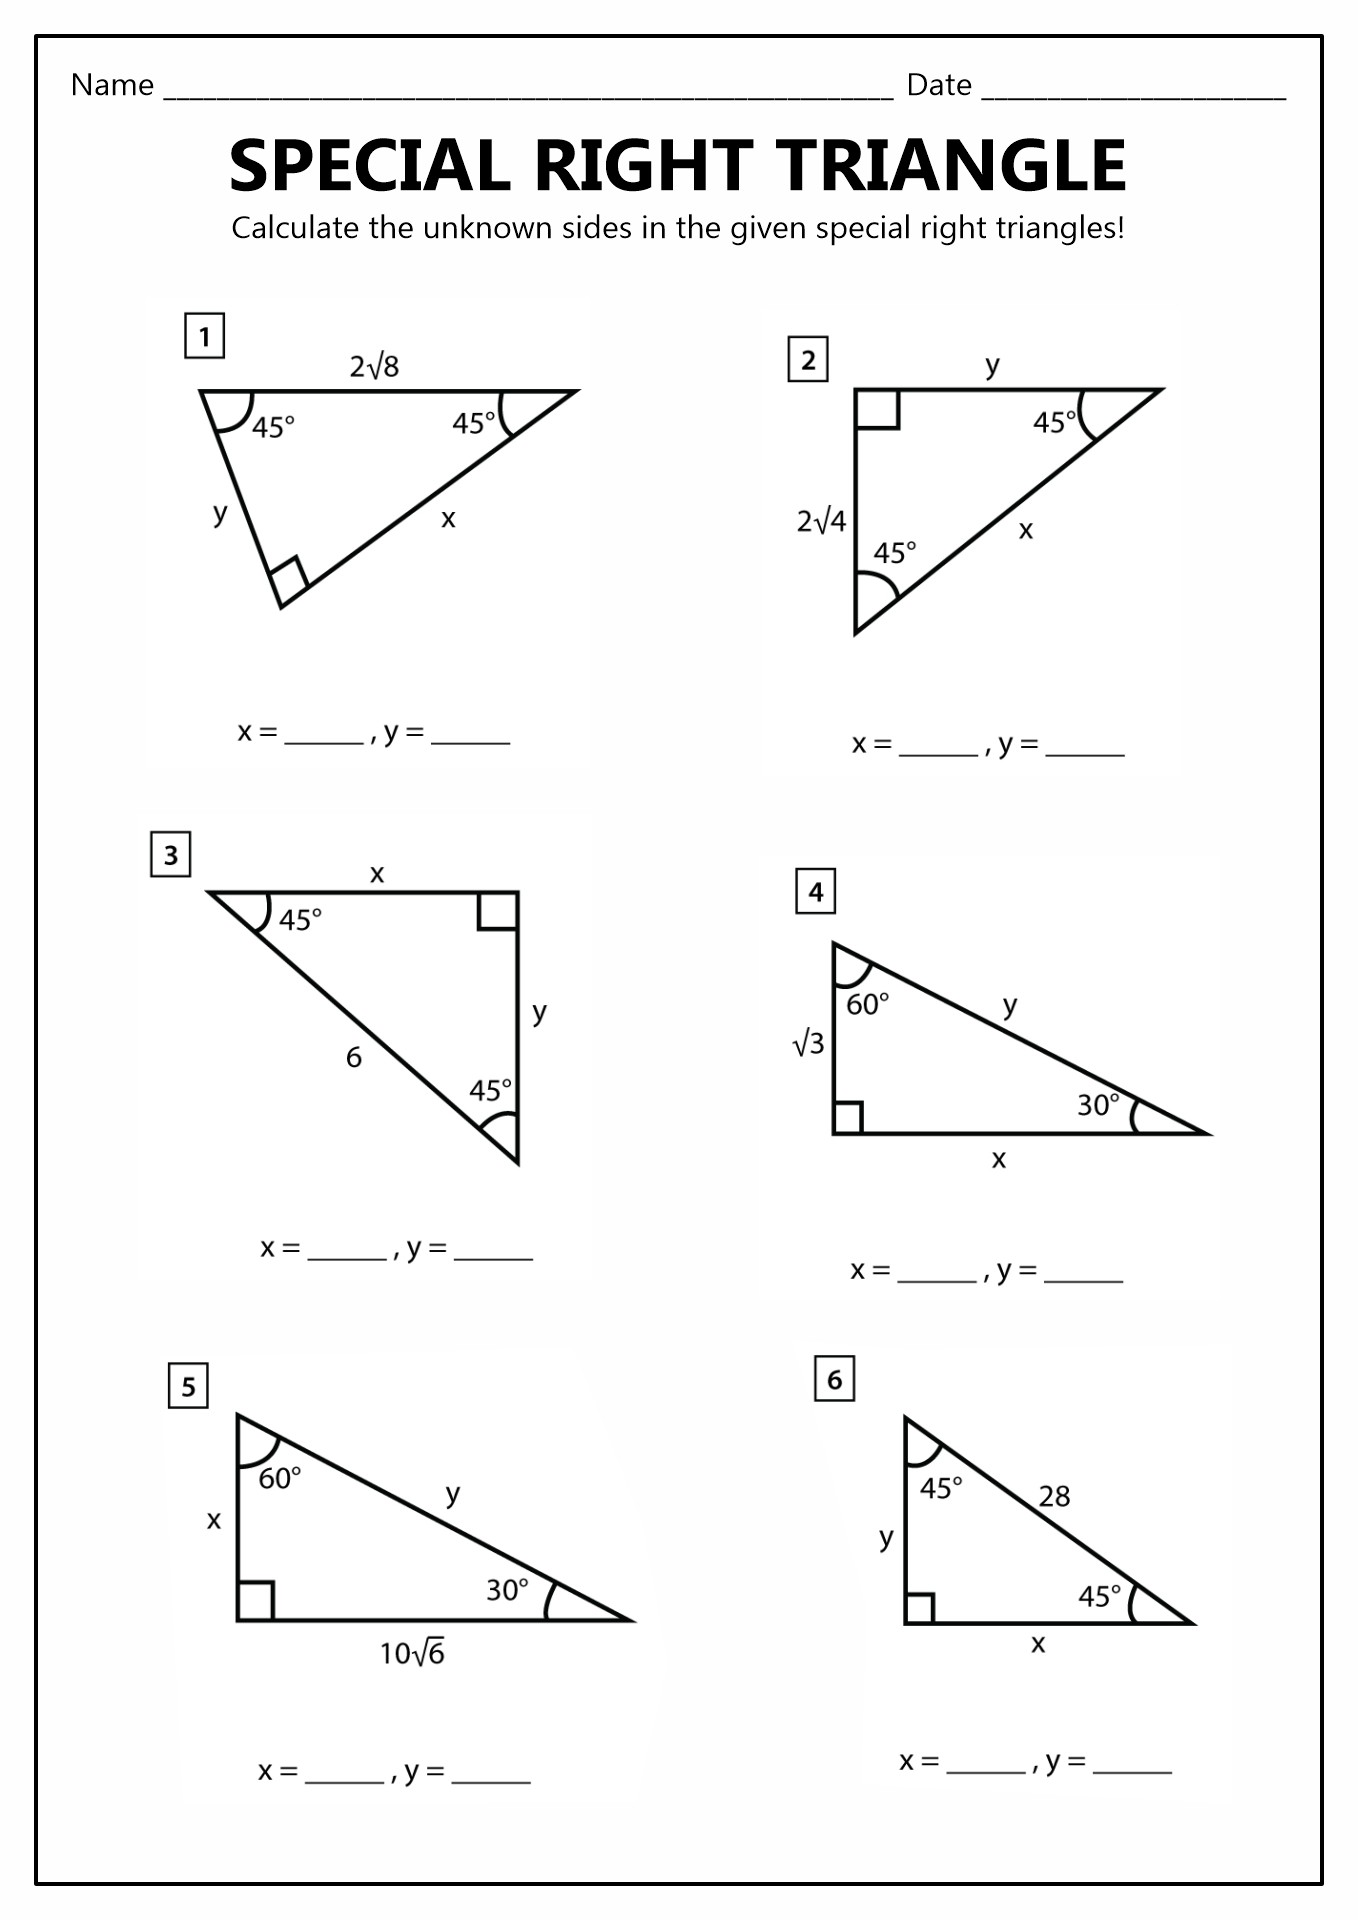 11 Best Images of Right Triangle Trigonometry Worksheet  Special Right Triangles Worksheet 